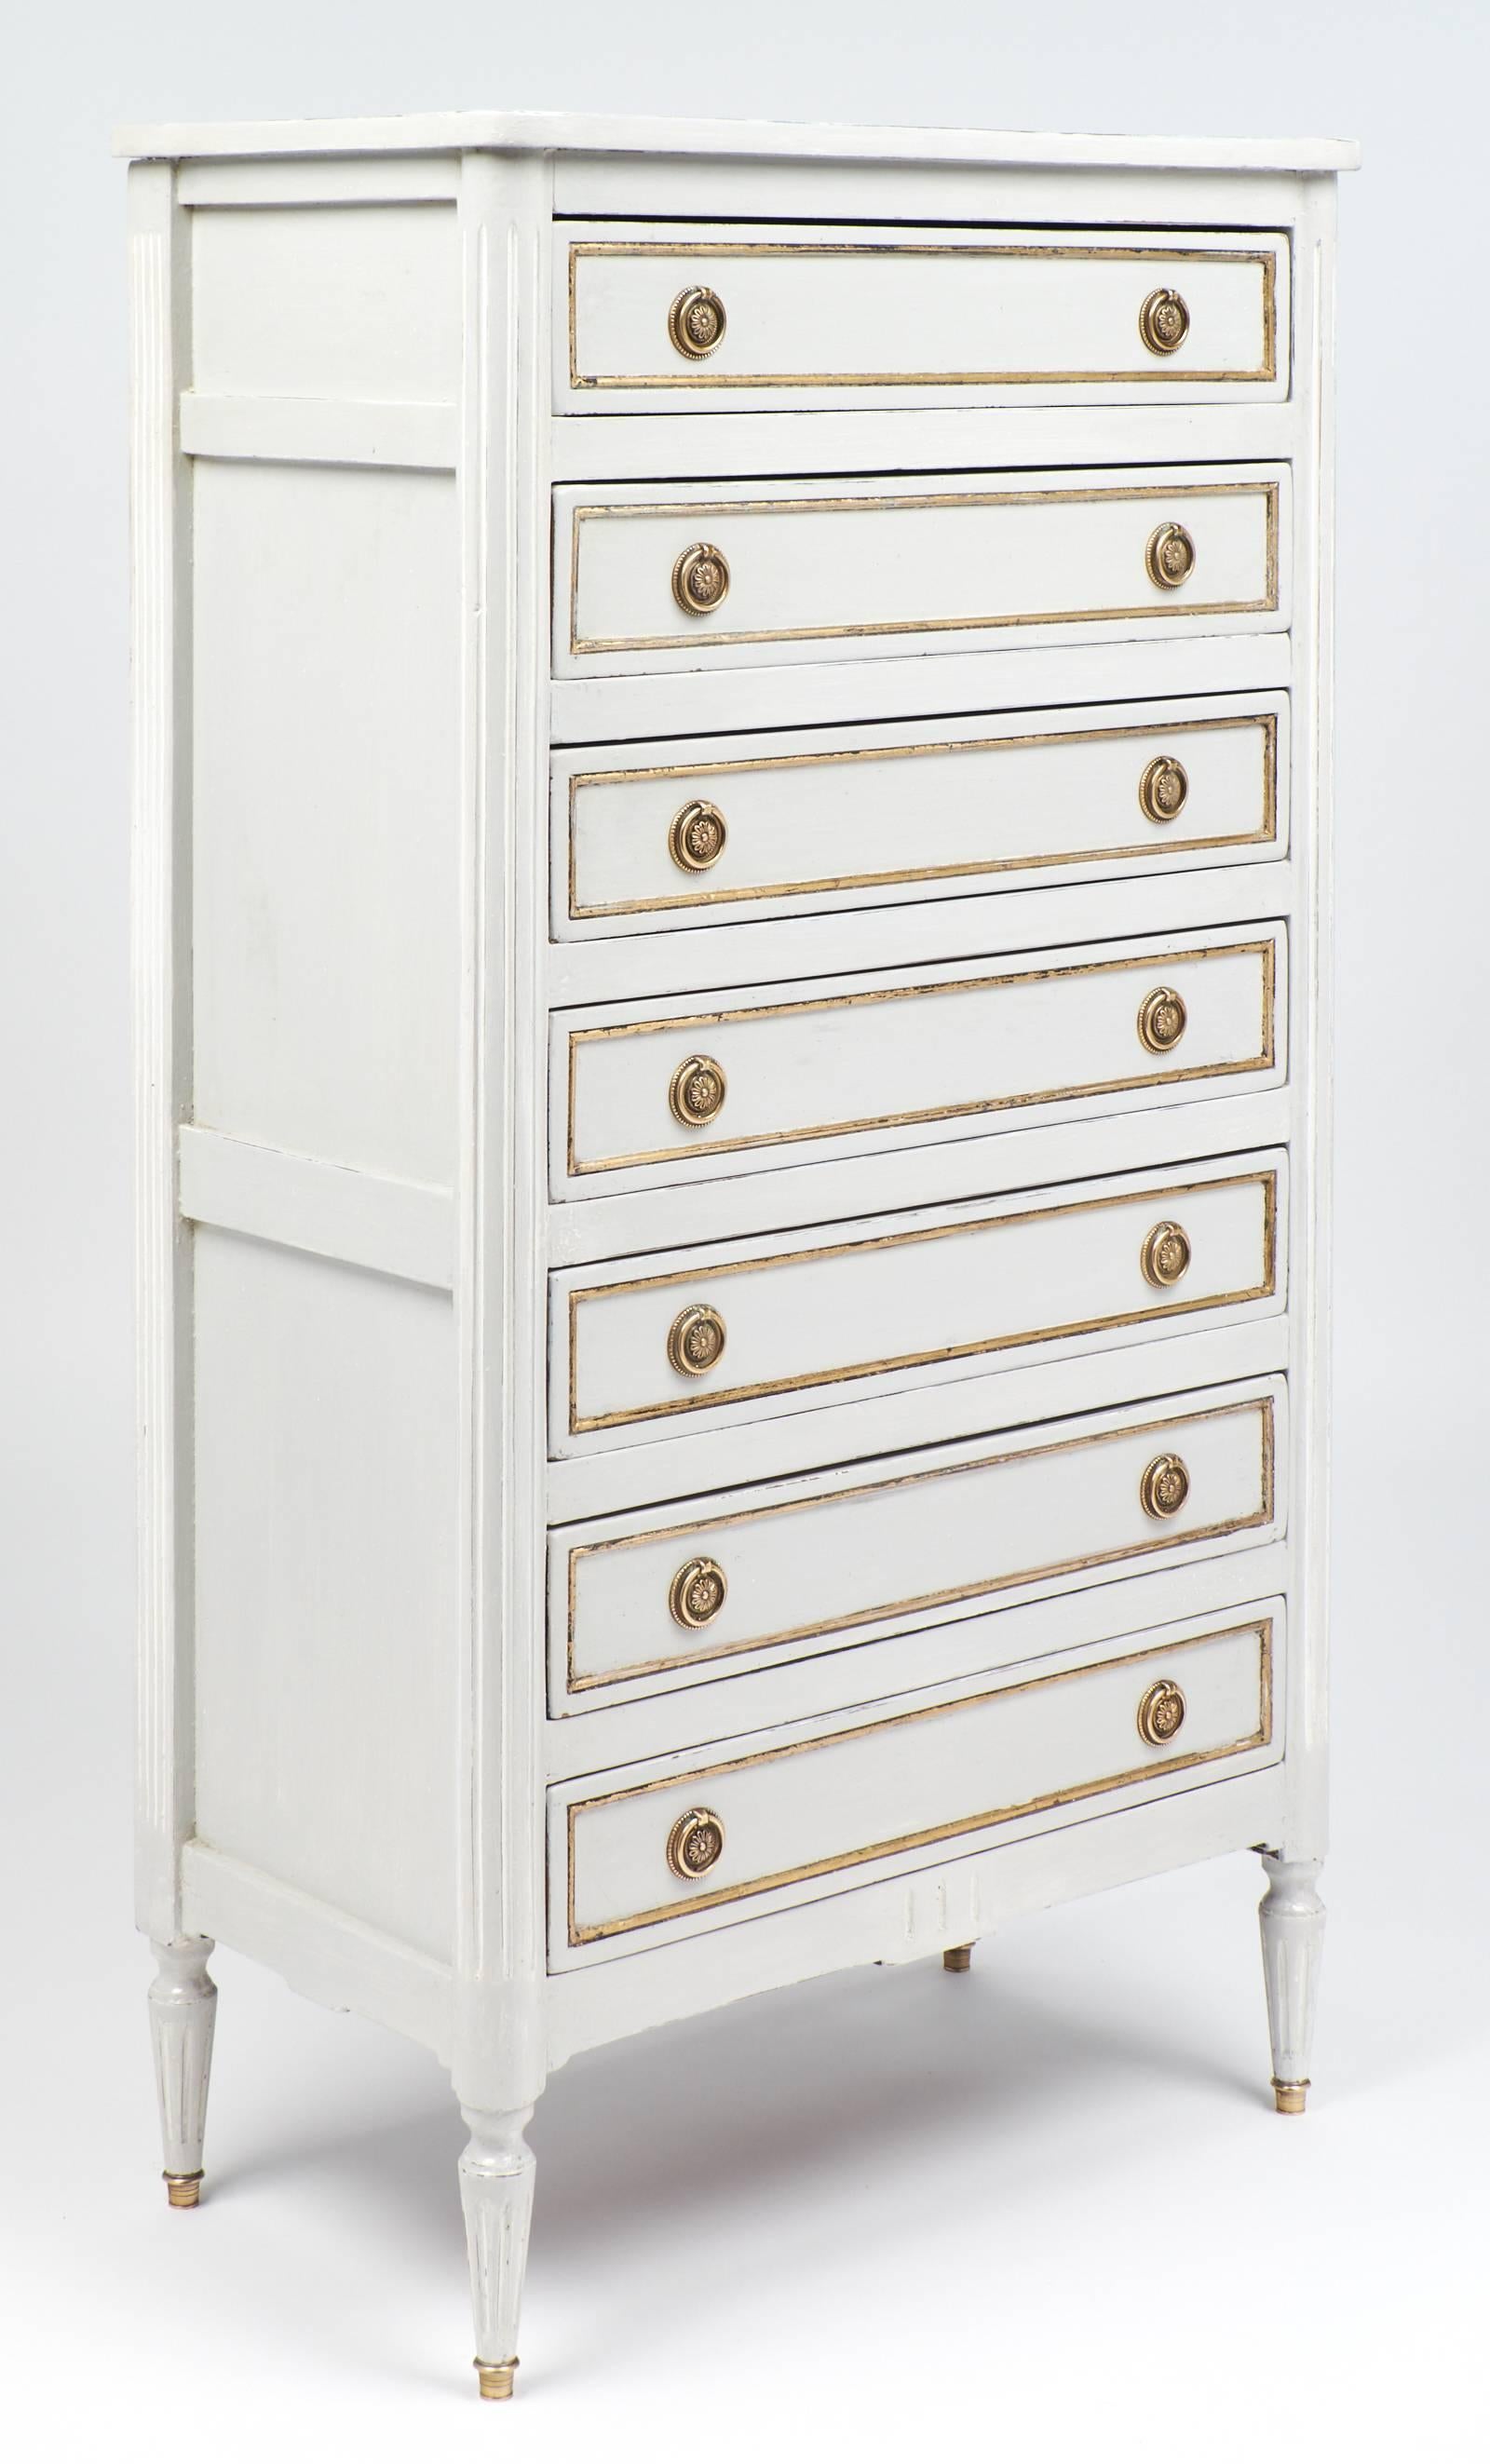 Antique French semainier chest of drawers painted dove grey and featuring brass hardware and gold leaf detailing on each drawer. This piece includes seven dovetailed drawers, giving it the name semainier. In French, semaine means week; one drawer